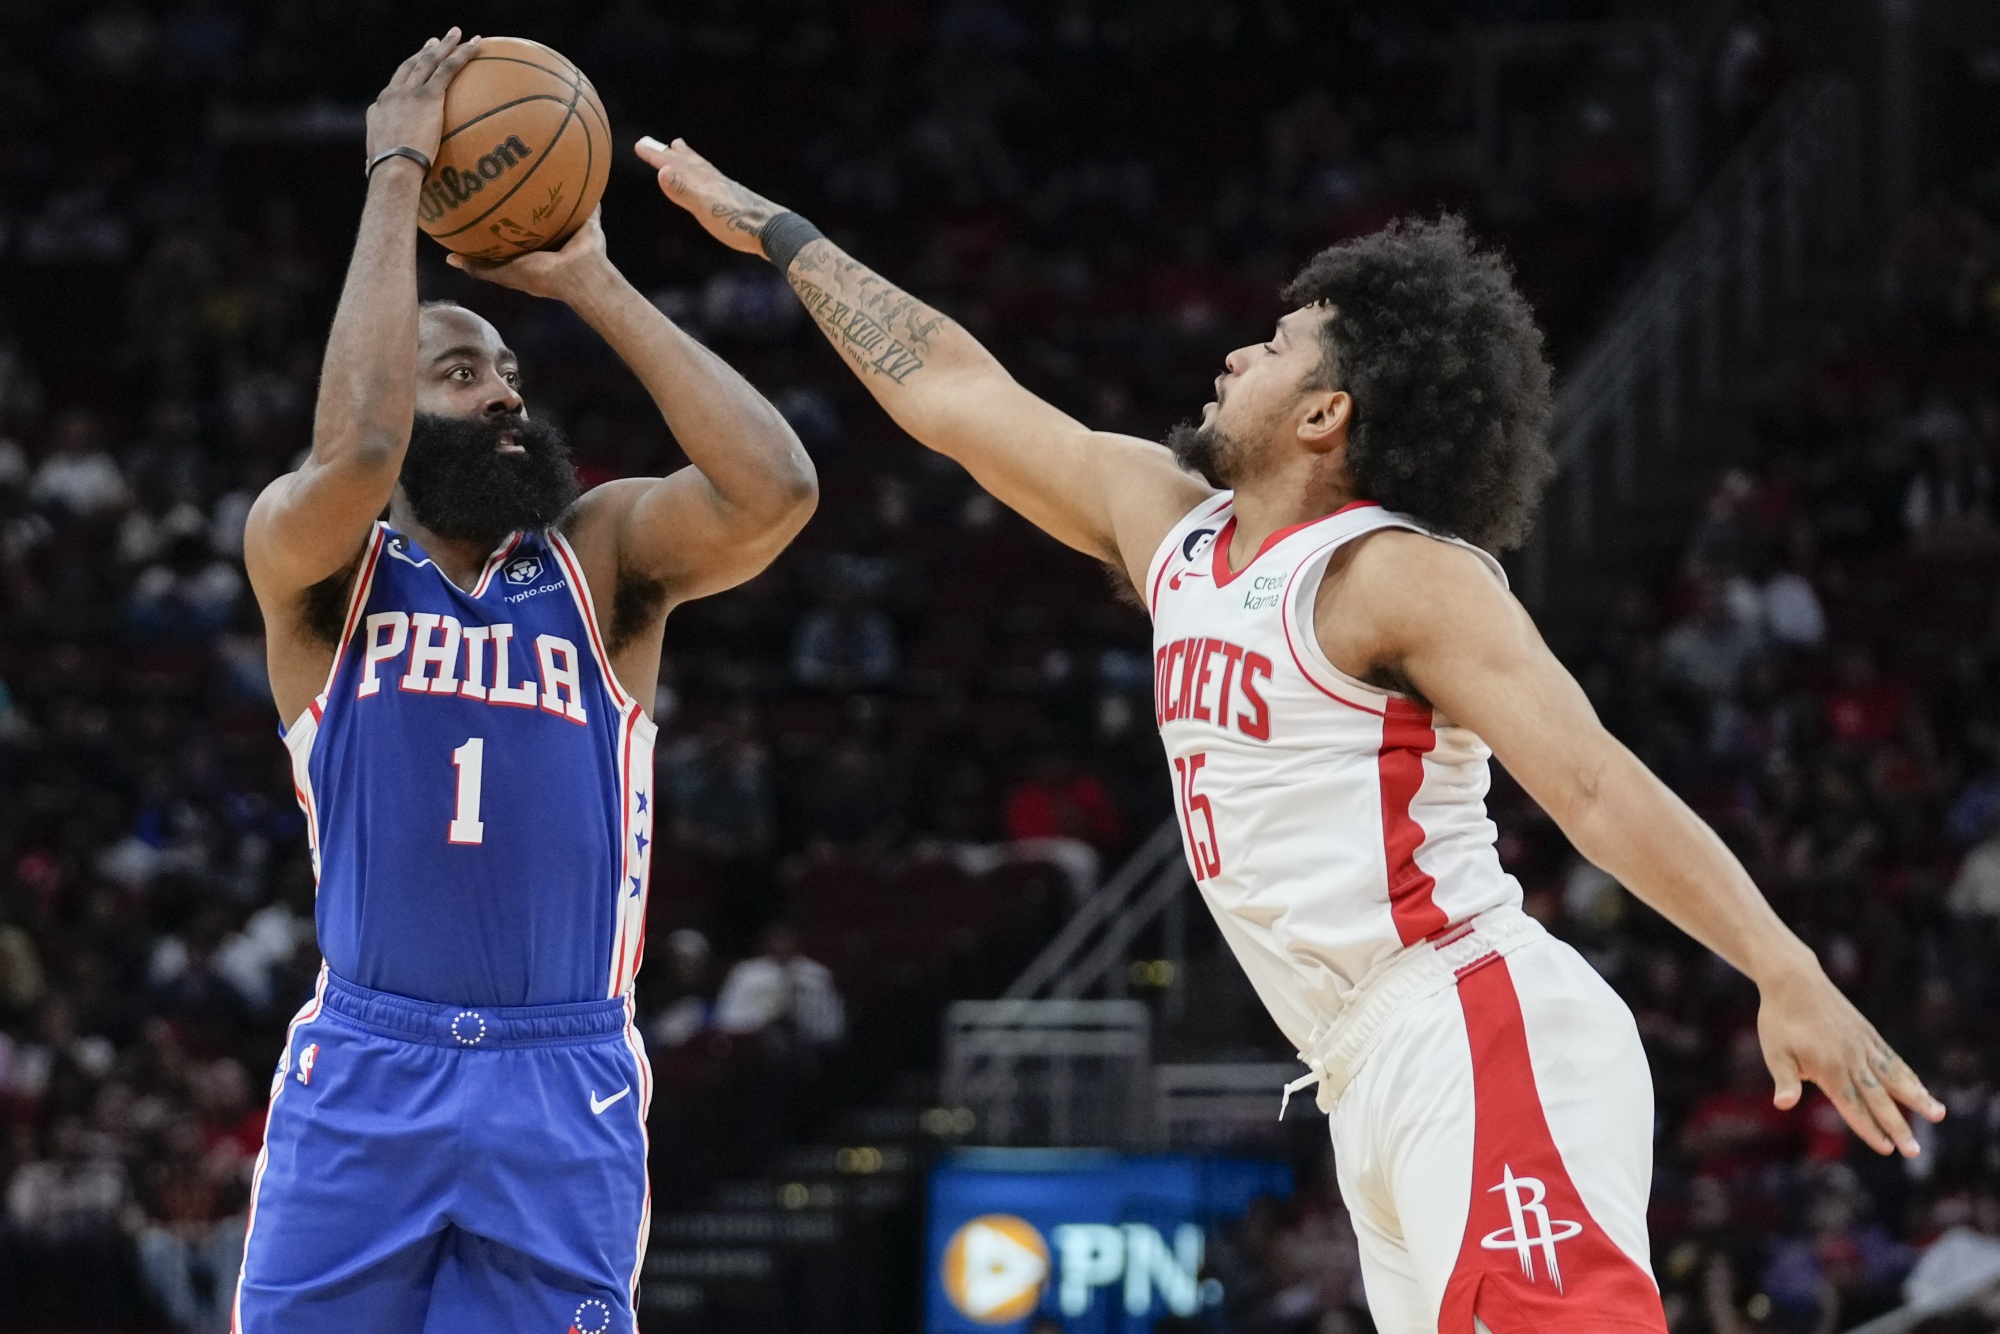 Houston Rockets' Kevin Porter Jr. fourth youngest to score 50